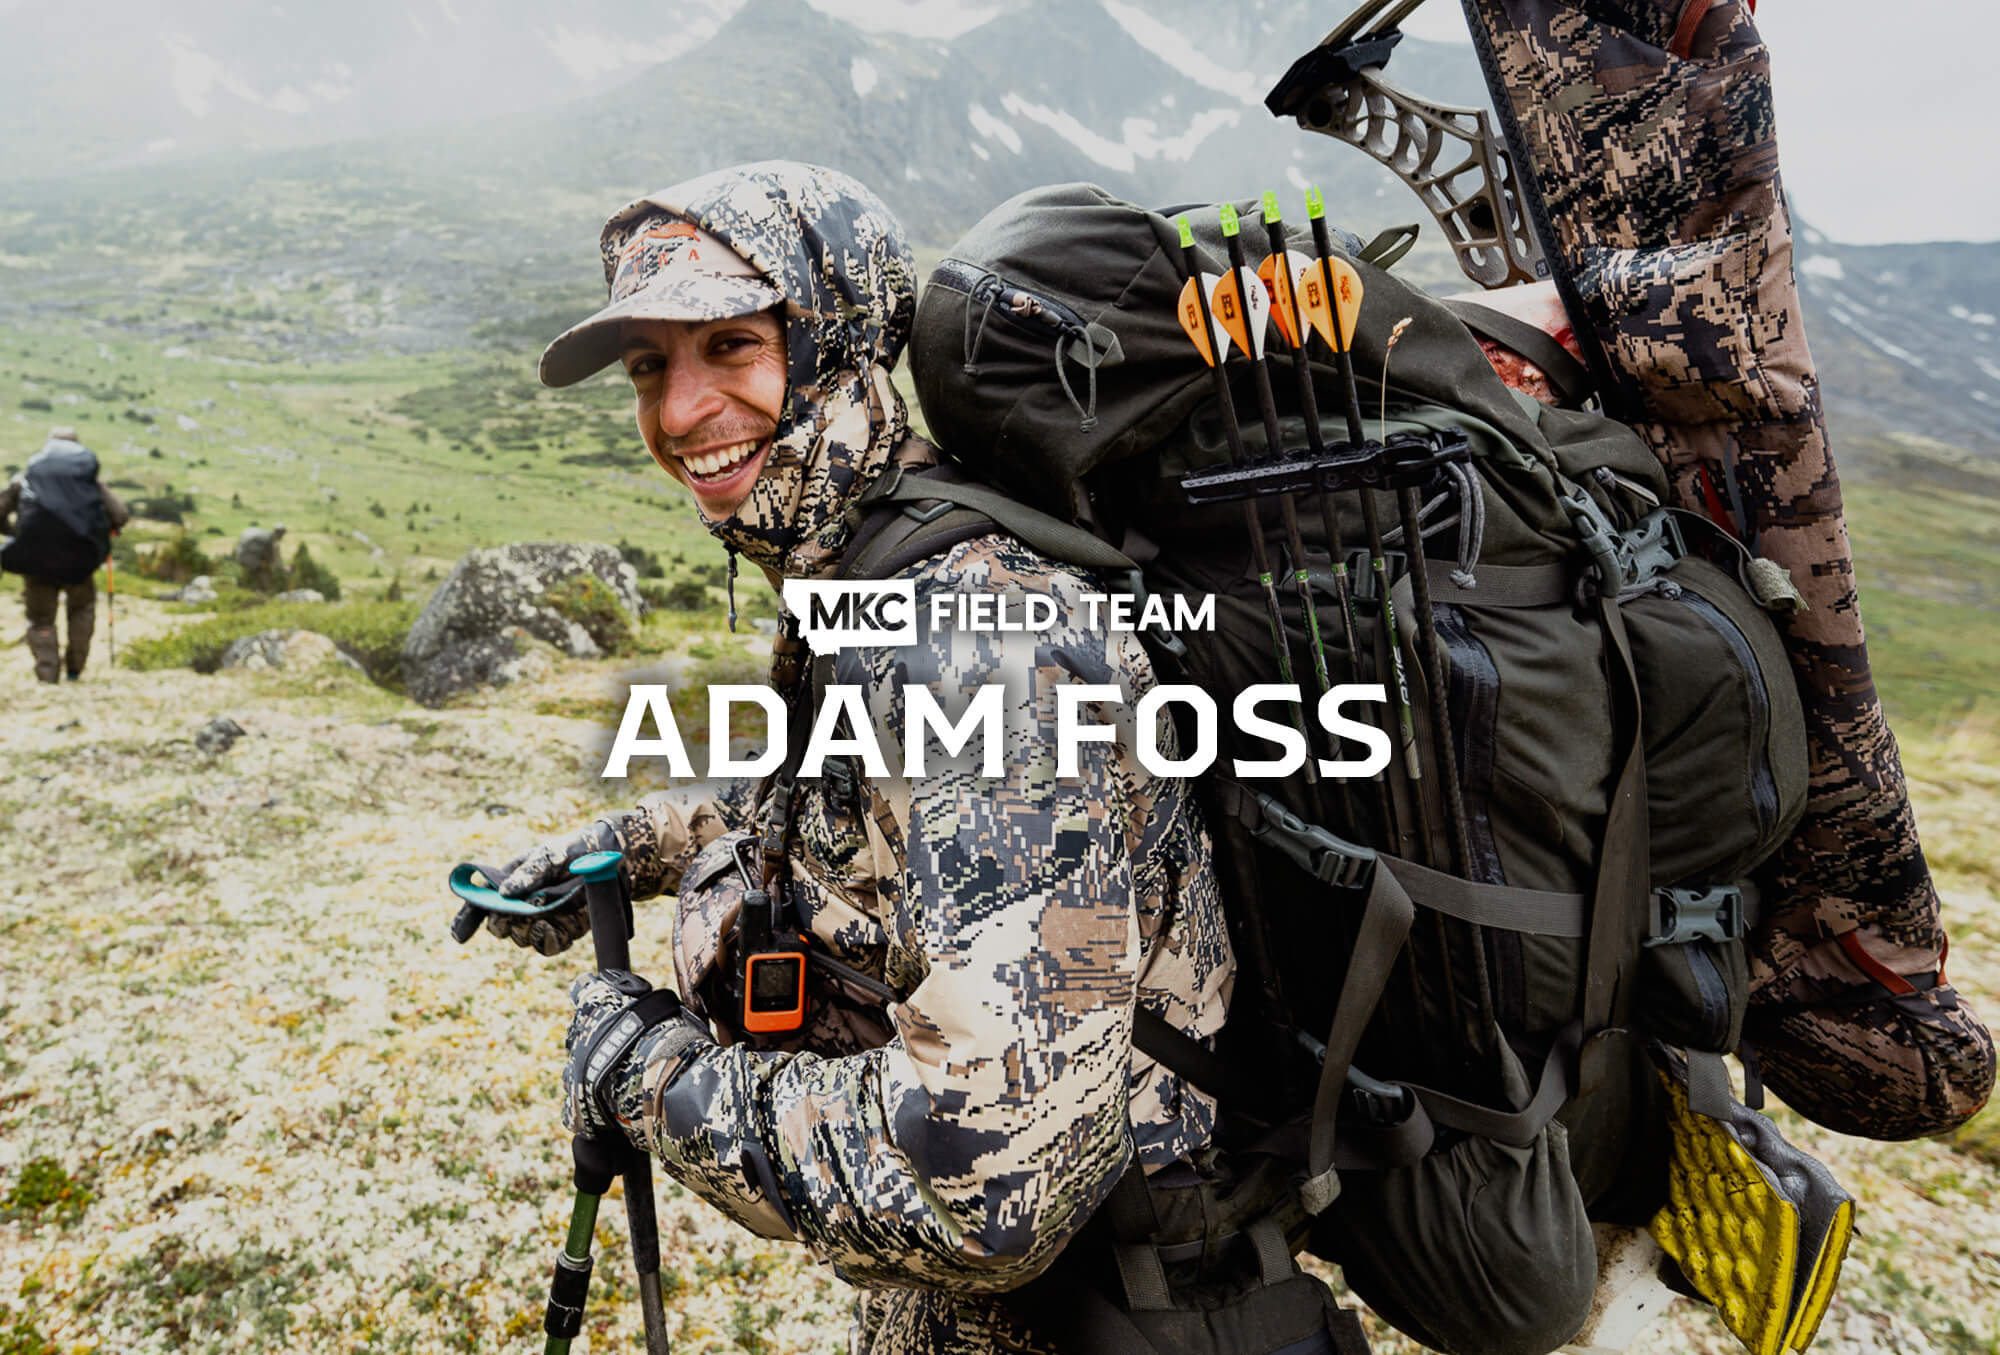 Adam Foss leans forward, laughing, to grip the photographer’s hand on a trail in the mountains.